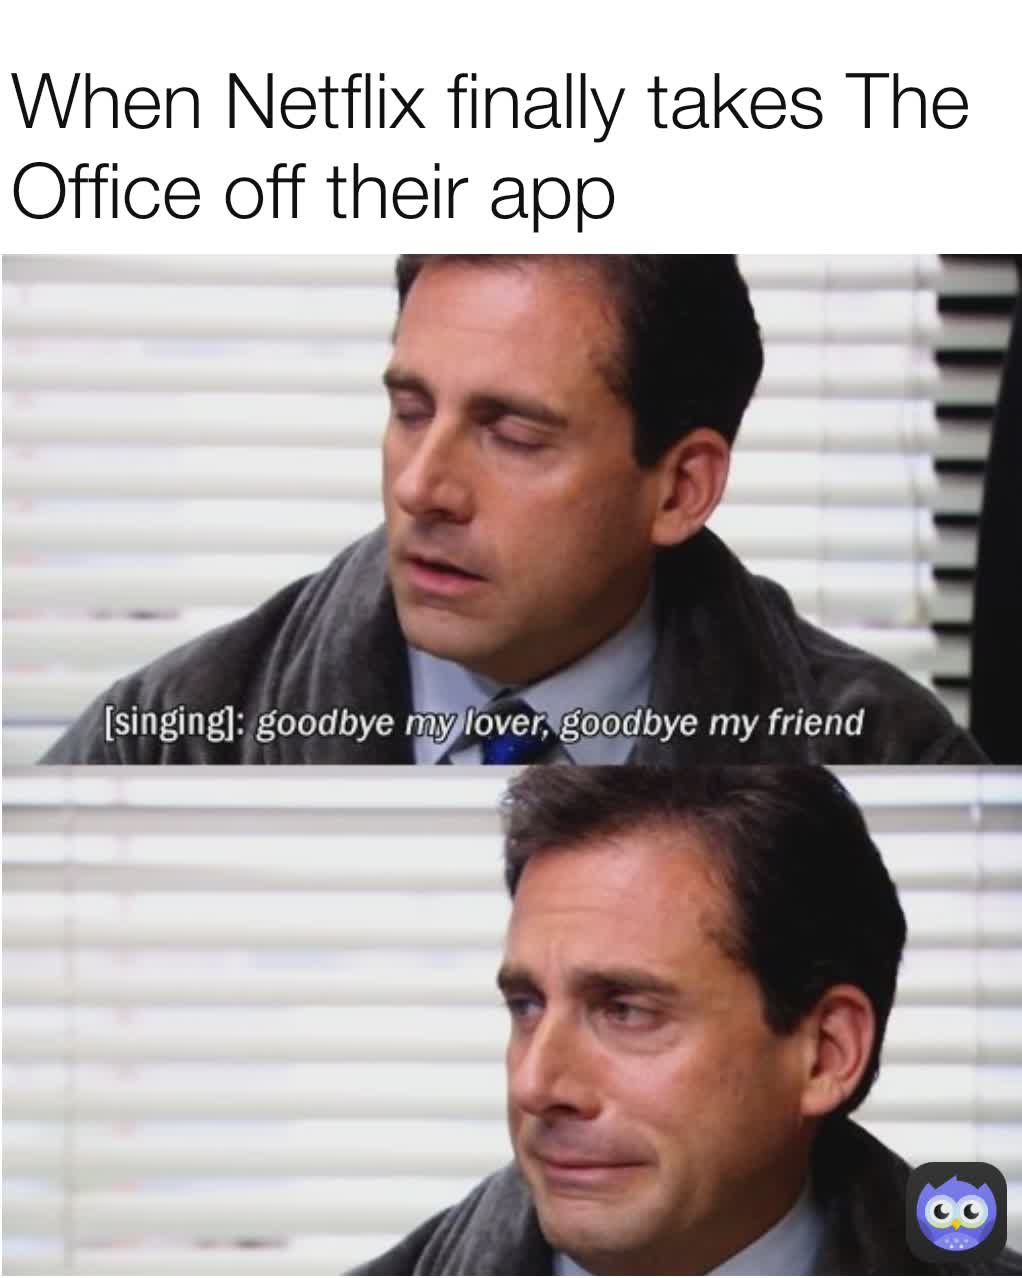 When Netflix finally takes The Office off their app